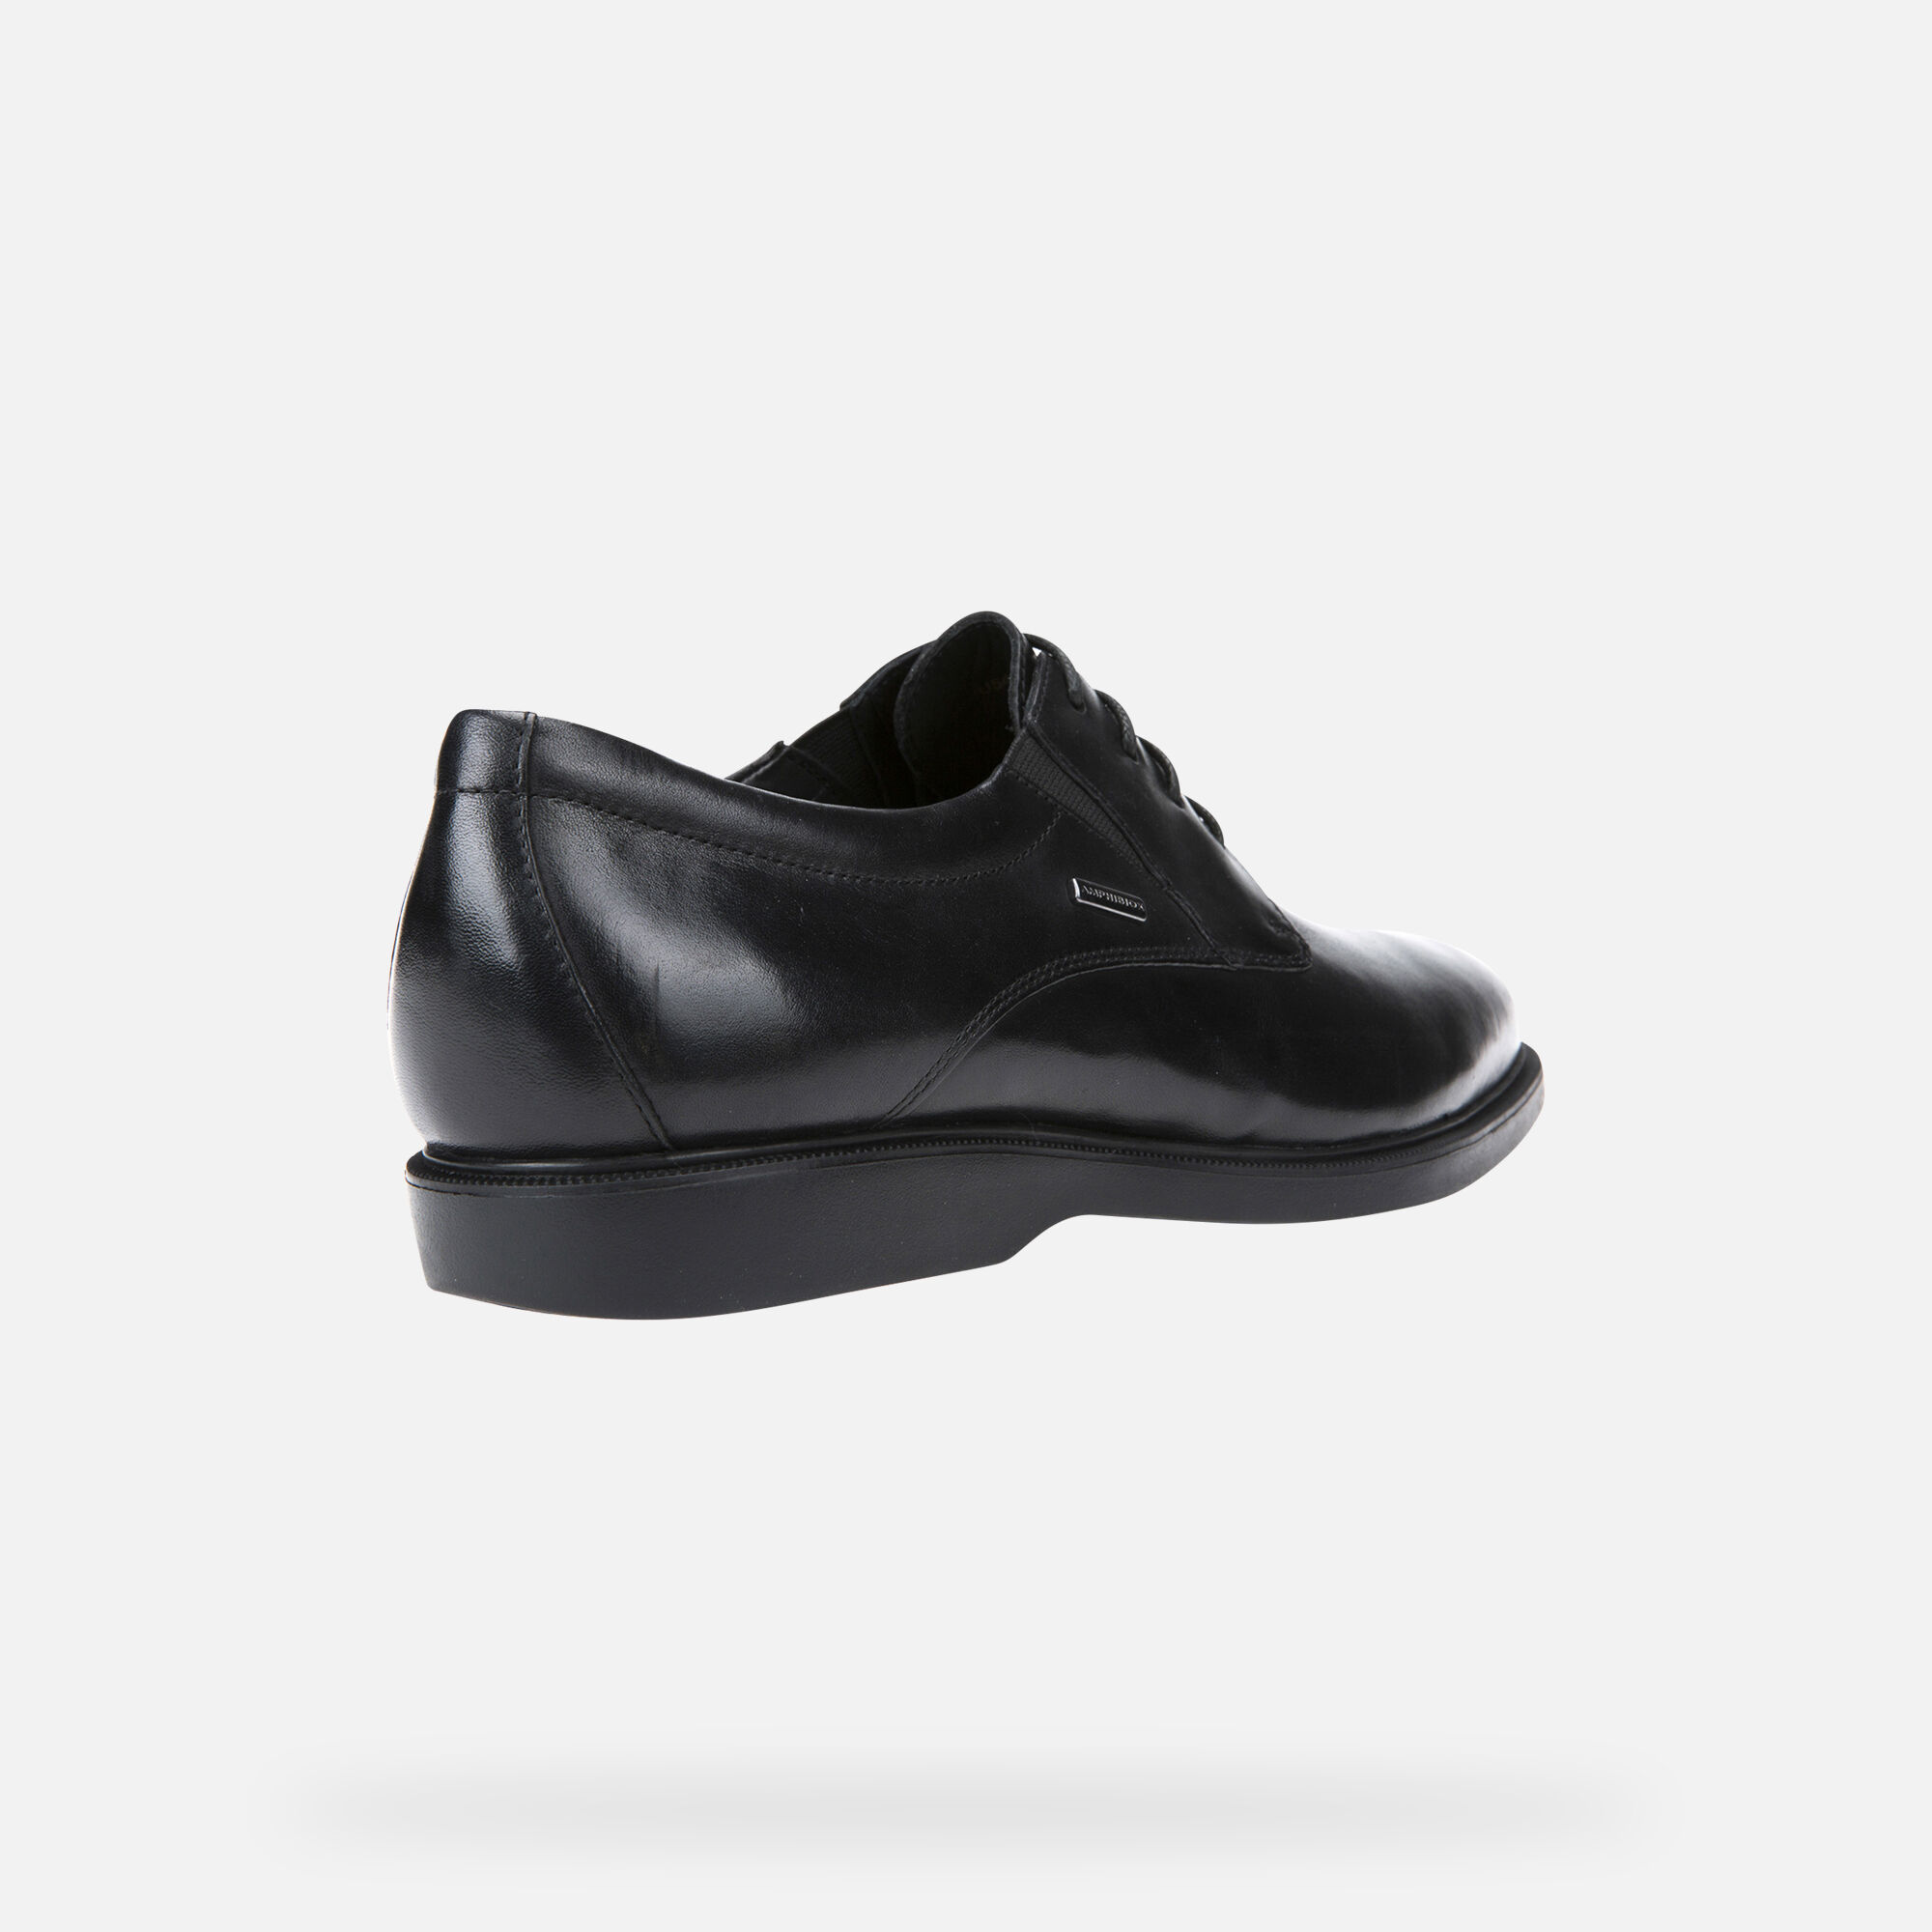 water resistant formal shoes